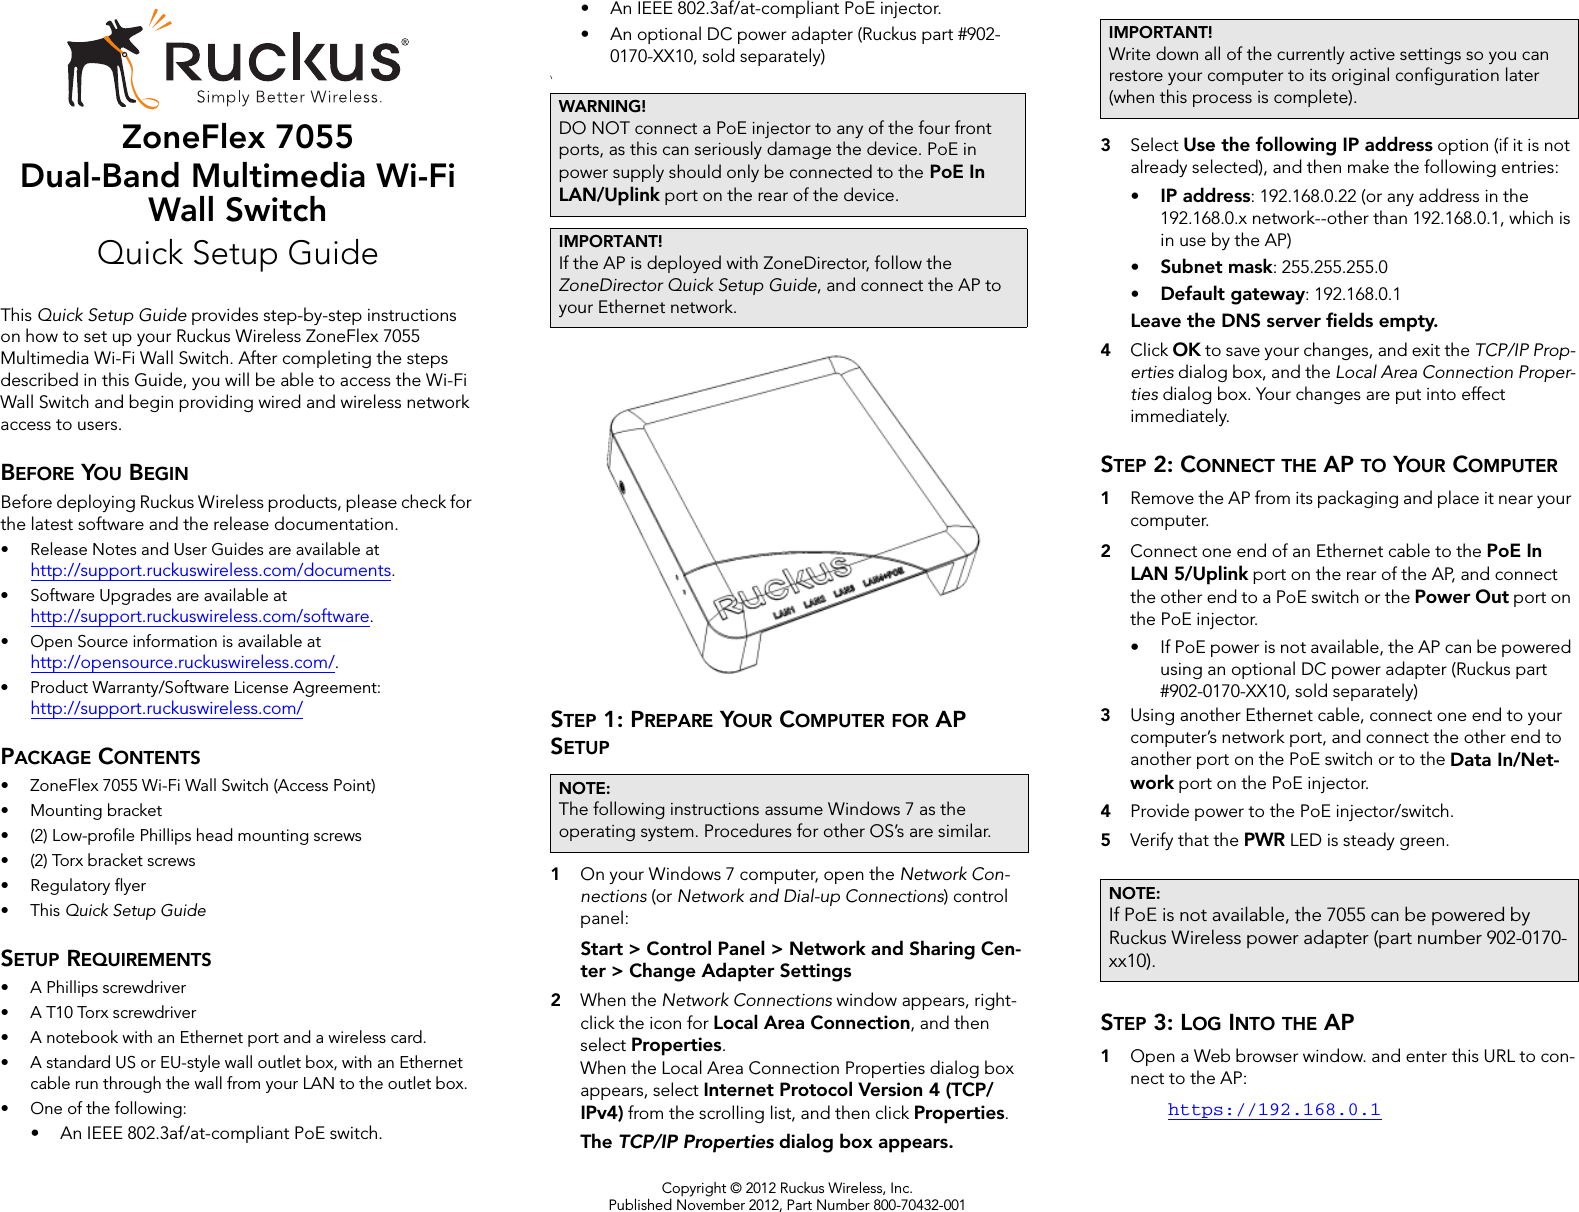 Copyright © 2012 Ruckus Wireless, Inc.Published November 2012, Part Number 800-70432-001ZoneFlex 7055Dual-Band Multimedia Wi-Fi Wall SwitchQuick Setup GuideThis Quick Setup Guide provides step-by-step instructions on how to set up your Ruckus Wireless ZoneFlex 7055 Multimedia Wi-Fi Wall Switch. After completing the steps described in this Guide, you will be able to access the Wi-Fi Wall Switch and begin providing wired and wireless network access to users.BEFORE YOU BEGINBefore deploying Ruckus Wireless products, please check for the latest software and the release documentation.• Release Notes and User Guides are available at http://support.ruckuswireless.com/documents.• Software Upgrades are available athttp://support.ruckuswireless.com/software.• Open Source information is available athttp://opensource.ruckuswireless.com/.• Product Warranty/Software License Agreement:http://support.ruckuswireless.com/PACKAGE CONTENTS• ZoneFlex 7055 Wi-Fi Wall Switch (Access Point)• Mounting bracket• (2) Low-profile Phillips head mounting screws• (2) Torx bracket screws• Regulatory flyer•This Quick Setup GuideSETUP REQUIREMENTS• A Phillips screwdriver• A T10 Torx screwdriver• A notebook with an Ethernet port and a wireless card.• A standard US or EU-style wall outlet box, with an Ethernet cable run through the wall from your LAN to the outlet box.• One of the following:• An IEEE 802.3af/at-compliant PoE switch. • An IEEE 802.3af/at-compliant PoE injector.• An optional DC power adapter (Ruckus part #902-0170-XX10, sold separately)\STEP 1: PREPARE YOUR COMPUTER FOR AP SETUP1On your Windows 7 computer, open the Network Con-nections (or Network and Dial-up Connections) control panel:Start &gt; Control Panel &gt; Network and Sharing Cen-ter &gt; Change Adapter Settings2When the Network Connections window appears, right-click the icon for Local Area Connection, and then select Properties. When the Local Area Connection Properties dialog box appears, select Internet Protocol Version 4 (TCP/IPv4) from the scrolling list, and then click Properties. The TCP/IP Properties dialog box appears.3Select Use the following IP address option (if it is not already selected), and then make the following entries:•IP address: 192.168.0.22 (or any address in the 192.168.0.x network--other than 192.168.0.1, which is in use by the AP)•Subnet mask: 255.255.255.0•Default gateway: 192.168.0.1Leave the DNS server fields empty.4Click OK to save your changes, and exit the TCP/IP Prop-erties dialog box, and the Local Area Connection Proper-ties dialog box. Your changes are put into effect immediately. STEP 2: CONNECT THE AP TO YOUR COMPUTER1Remove the AP from its packaging and place it near your computer. 2Connect one end of an Ethernet cable to the PoE In LAN 5/Uplink port on the rear of the AP, and connect the other end to a PoE switch or the Power Out port on the PoE injector.• If PoE power is not available, the AP can be powered using an optional DC power adapter (Ruckus part #902-0170-XX10, sold separately)3Using another Ethernet cable, connect one end to your computer’s network port, and connect the other end to another port on the PoE switch or to the Data In/Net-work port on the PoE injector.4Provide power to the PoE injector/switch.5Verify that the PWR LED is steady green.STEP 3: LOG INTO THE AP 1Open a Web browser window. and enter this URL to con-nect to the AP: https://192.168.0.1WARNING!DO NOT connect a PoE injector to any of the four front ports, as this can seriously damage the device. PoE in power supply should only be connected to the PoE In LAN/Uplink port on the rear of the device.IMPORTANT!If the AP is deployed with ZoneDirector, follow the ZoneDirector Quick Setup Guide, and connect the AP to your Ethernet network.NOTE:The following instructions assume Windows 7 as the operating system. Procedures for other OS’s are similar.IMPORTANT!Write down all of the currently active settings so you can restore your computer to its original configuration later (when this process is complete).NOTE:If PoE is not available, the 7055 can be powered by Ruckus Wireless power adapter (part number 902-0170-xx10).